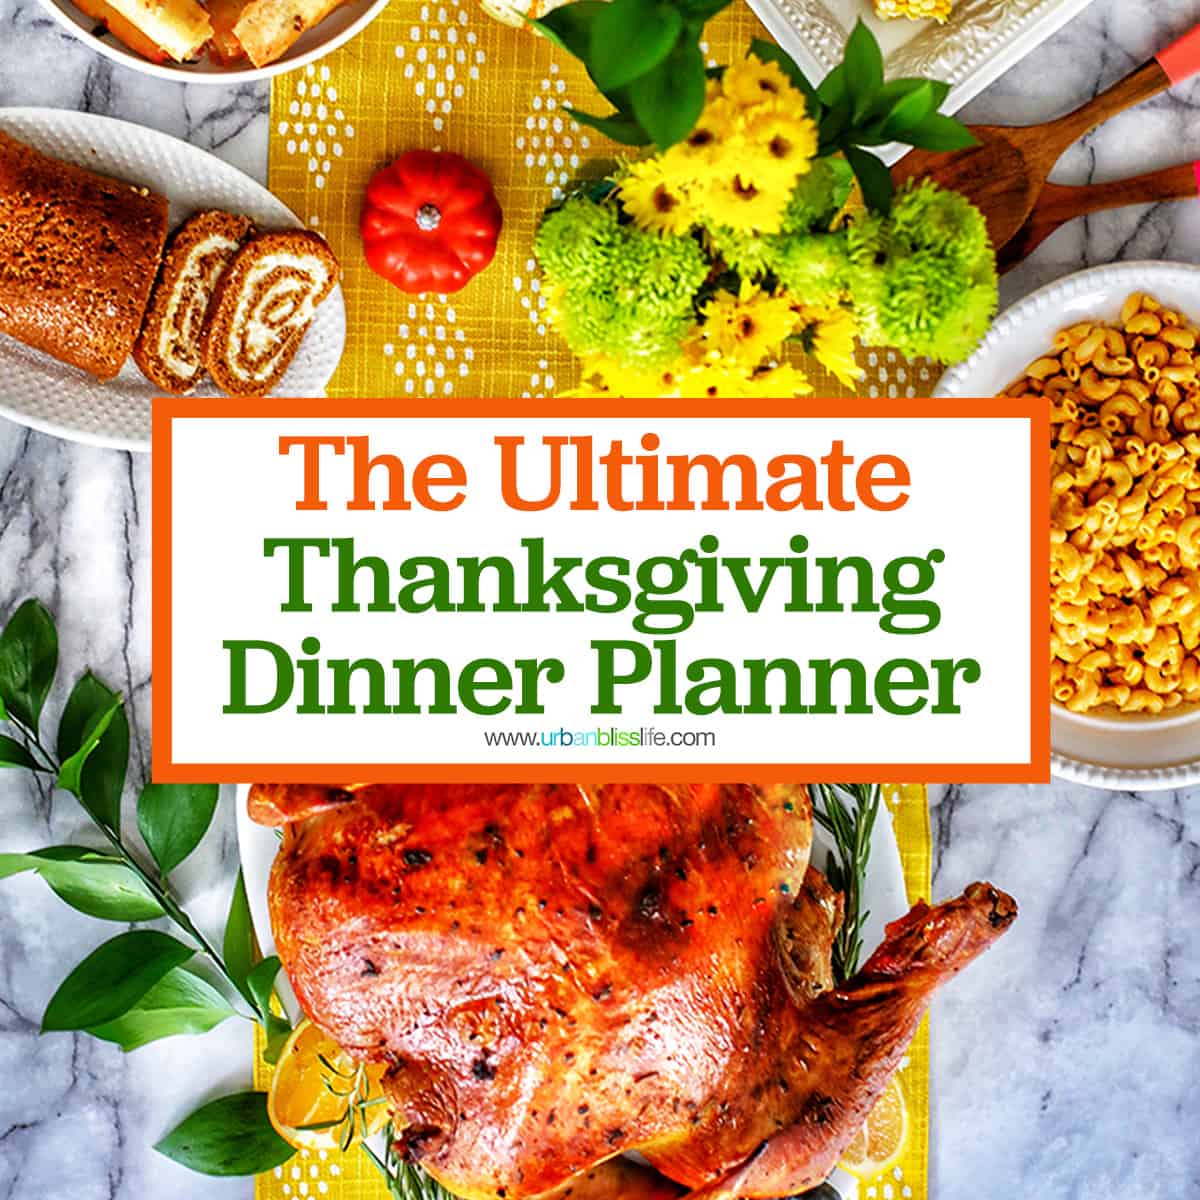 Thanksgiving dinner table with turkey and sides and title text that reads "The Ultimate Thanksgiving Dinner Planner."